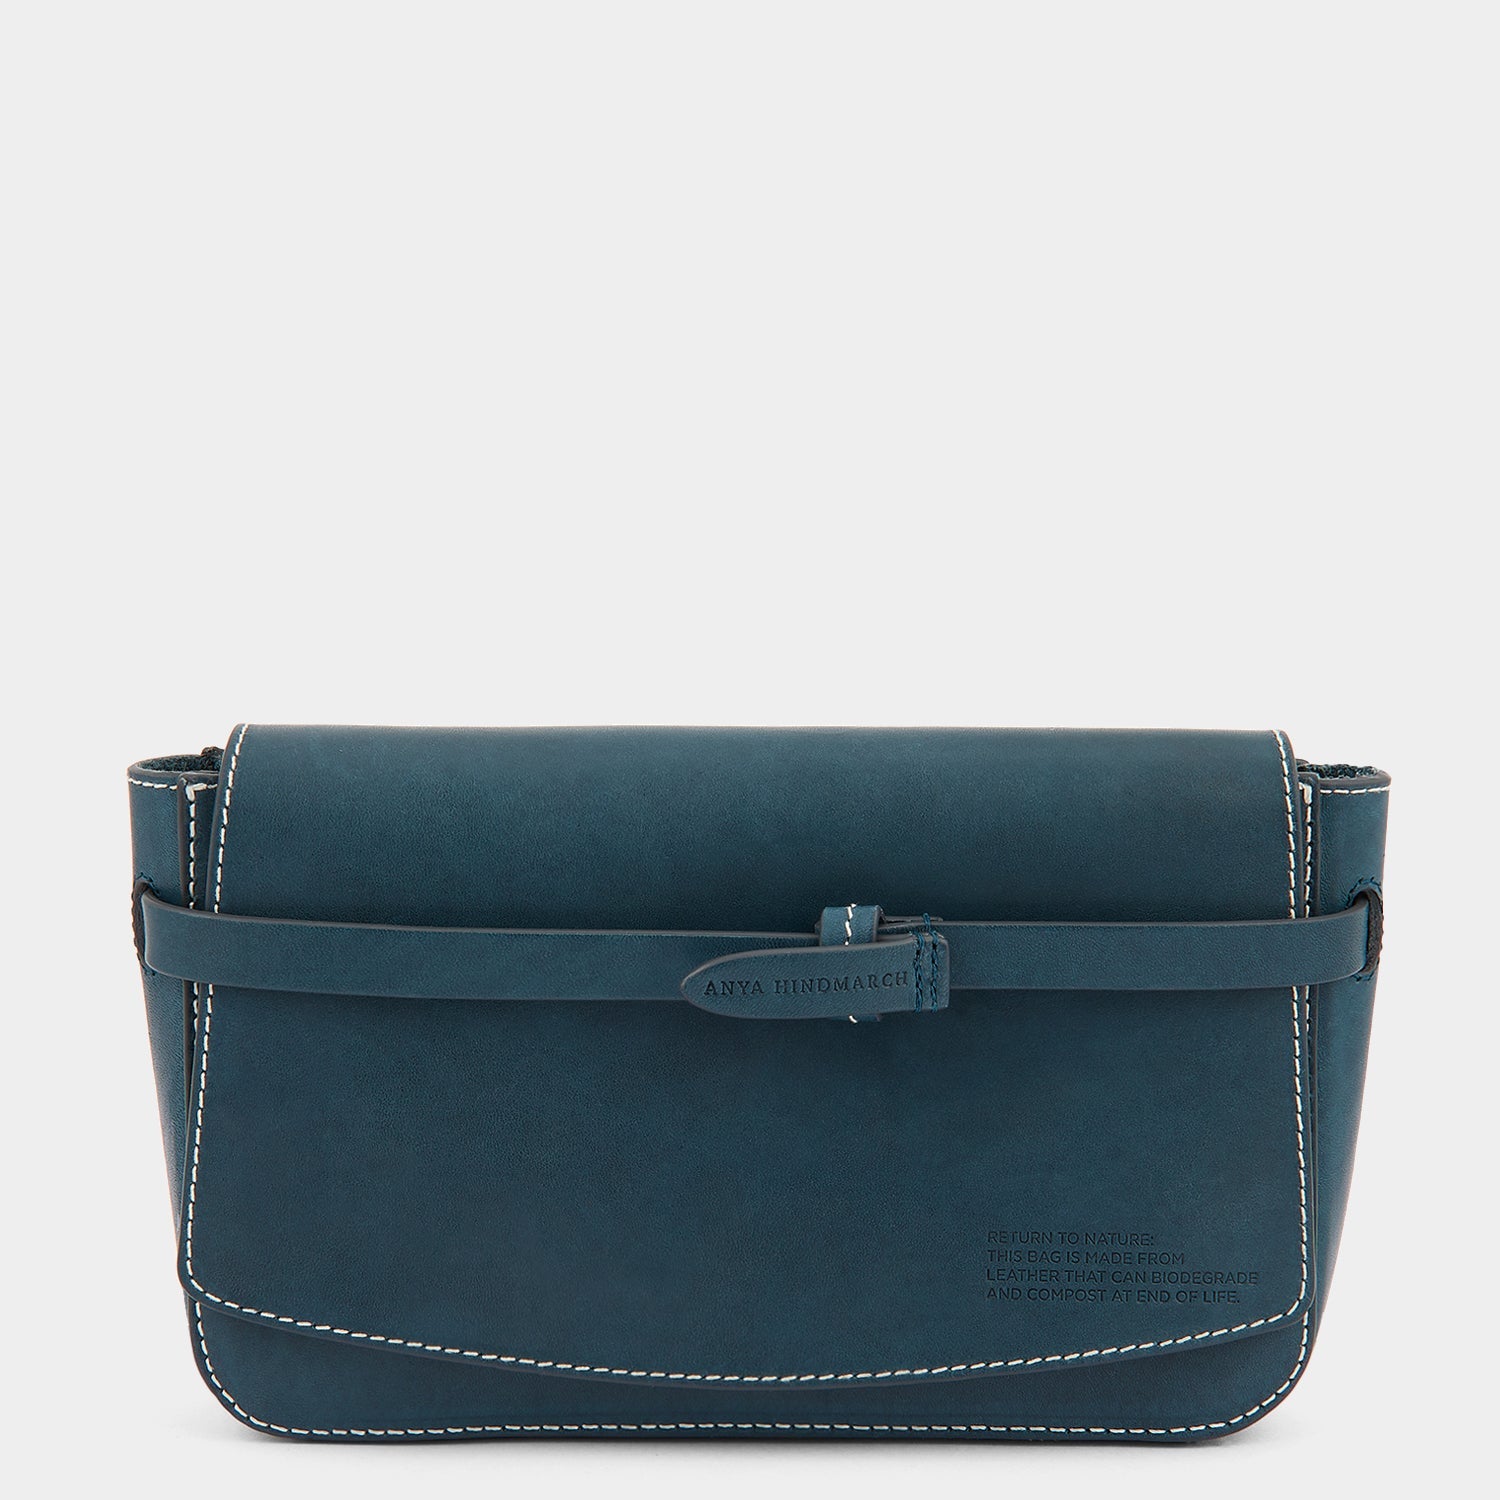 Return to Nature Clutch -

                  
                    Compostable Leather in Dark Holly -
                  

                  Anya Hindmarch EU
